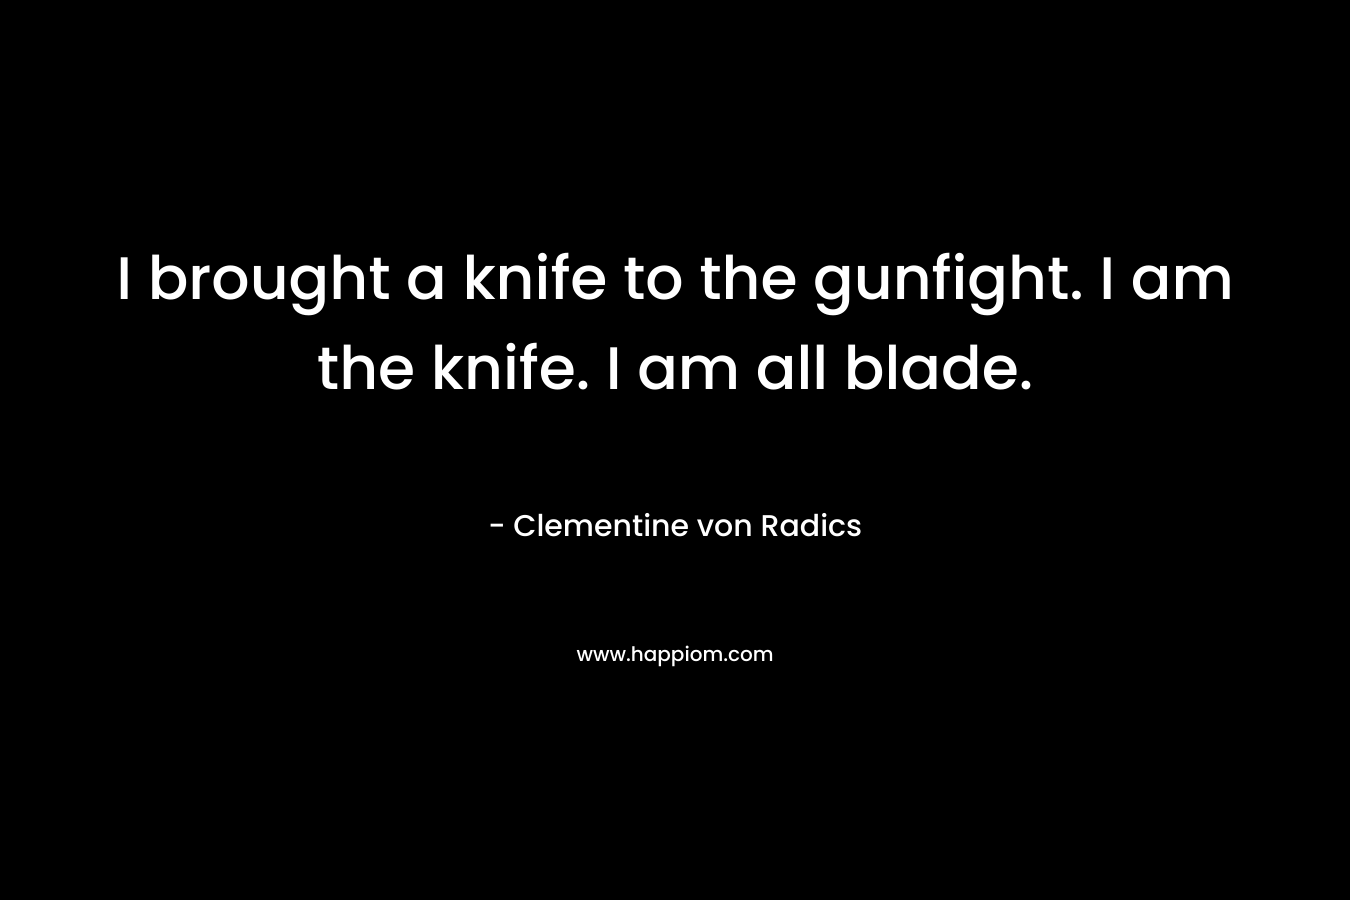 I brought a knife to the gunfight. I am the knife. I am all blade. – Clementine von Radics